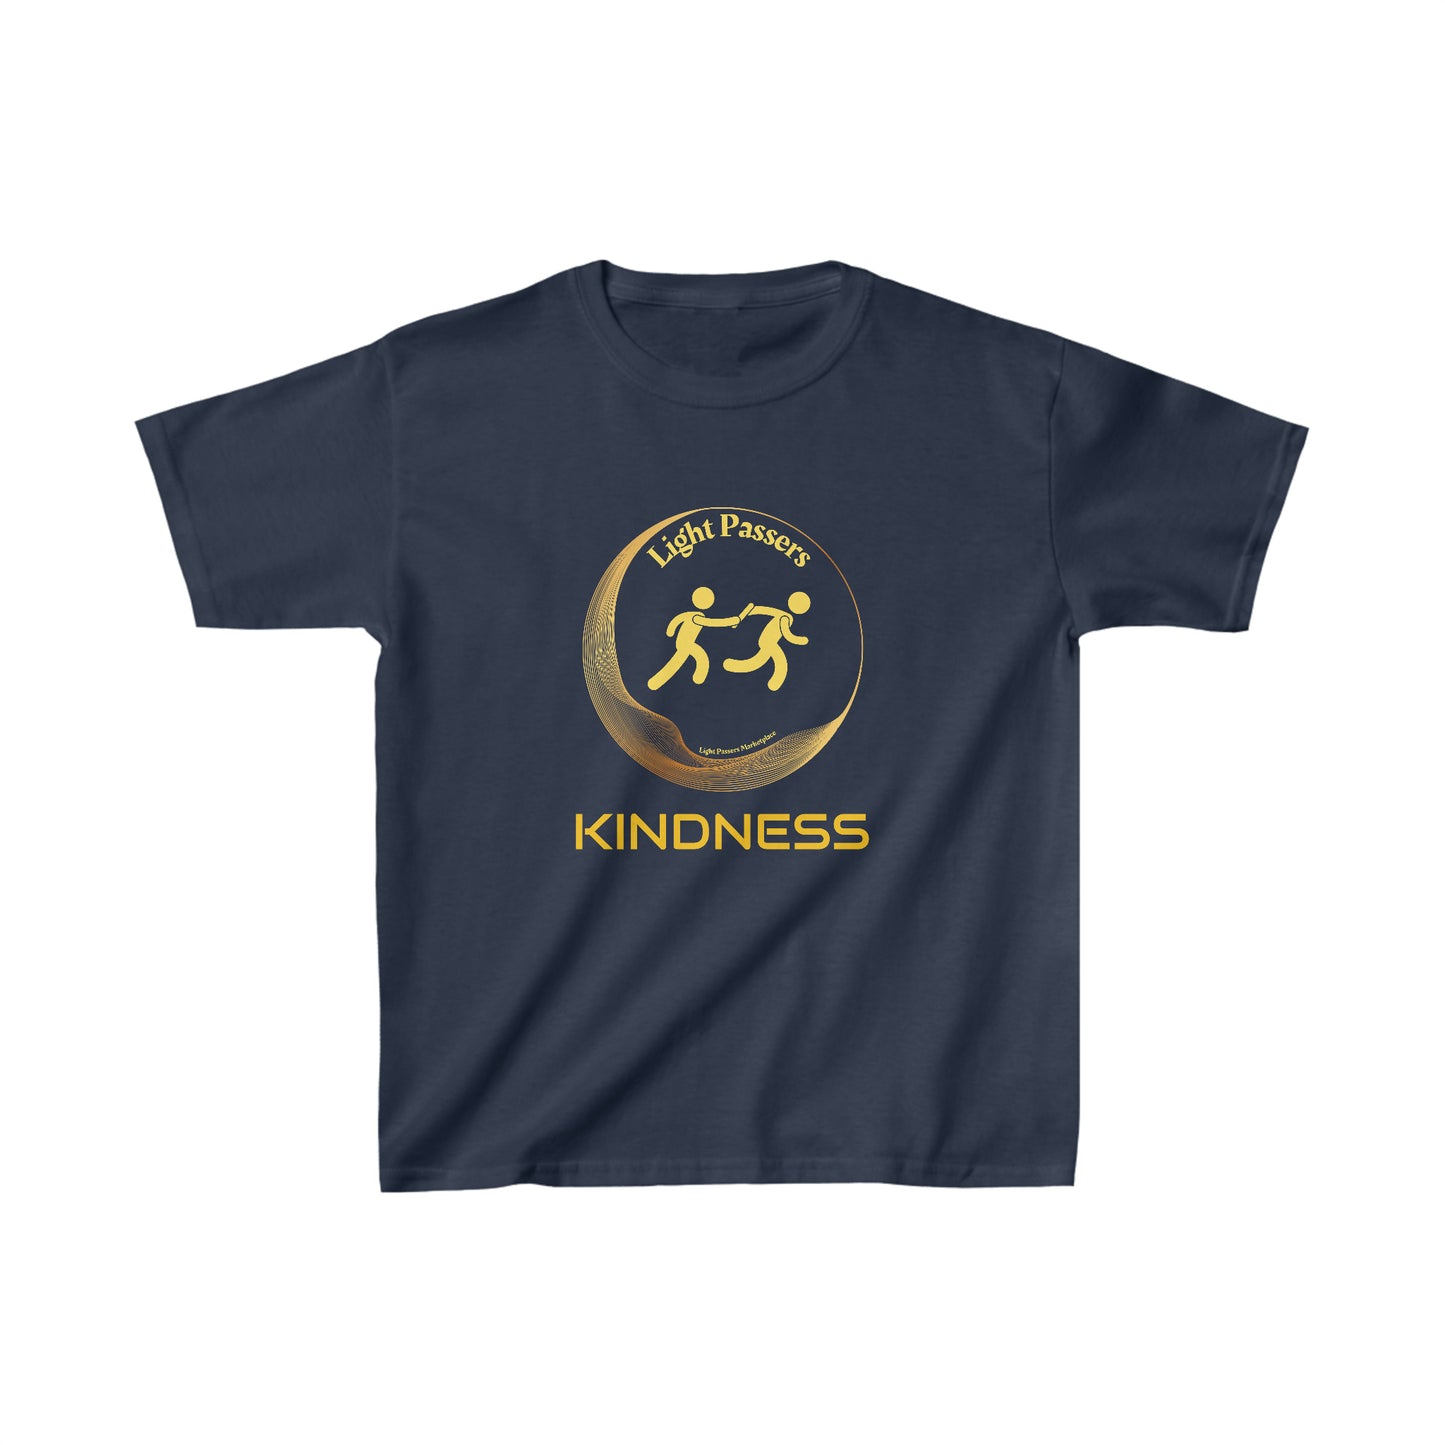 Light Passers Marketplace Light Passers Relay Kindness Youth T-shirt Simple Messages, Fitness, Mental Health